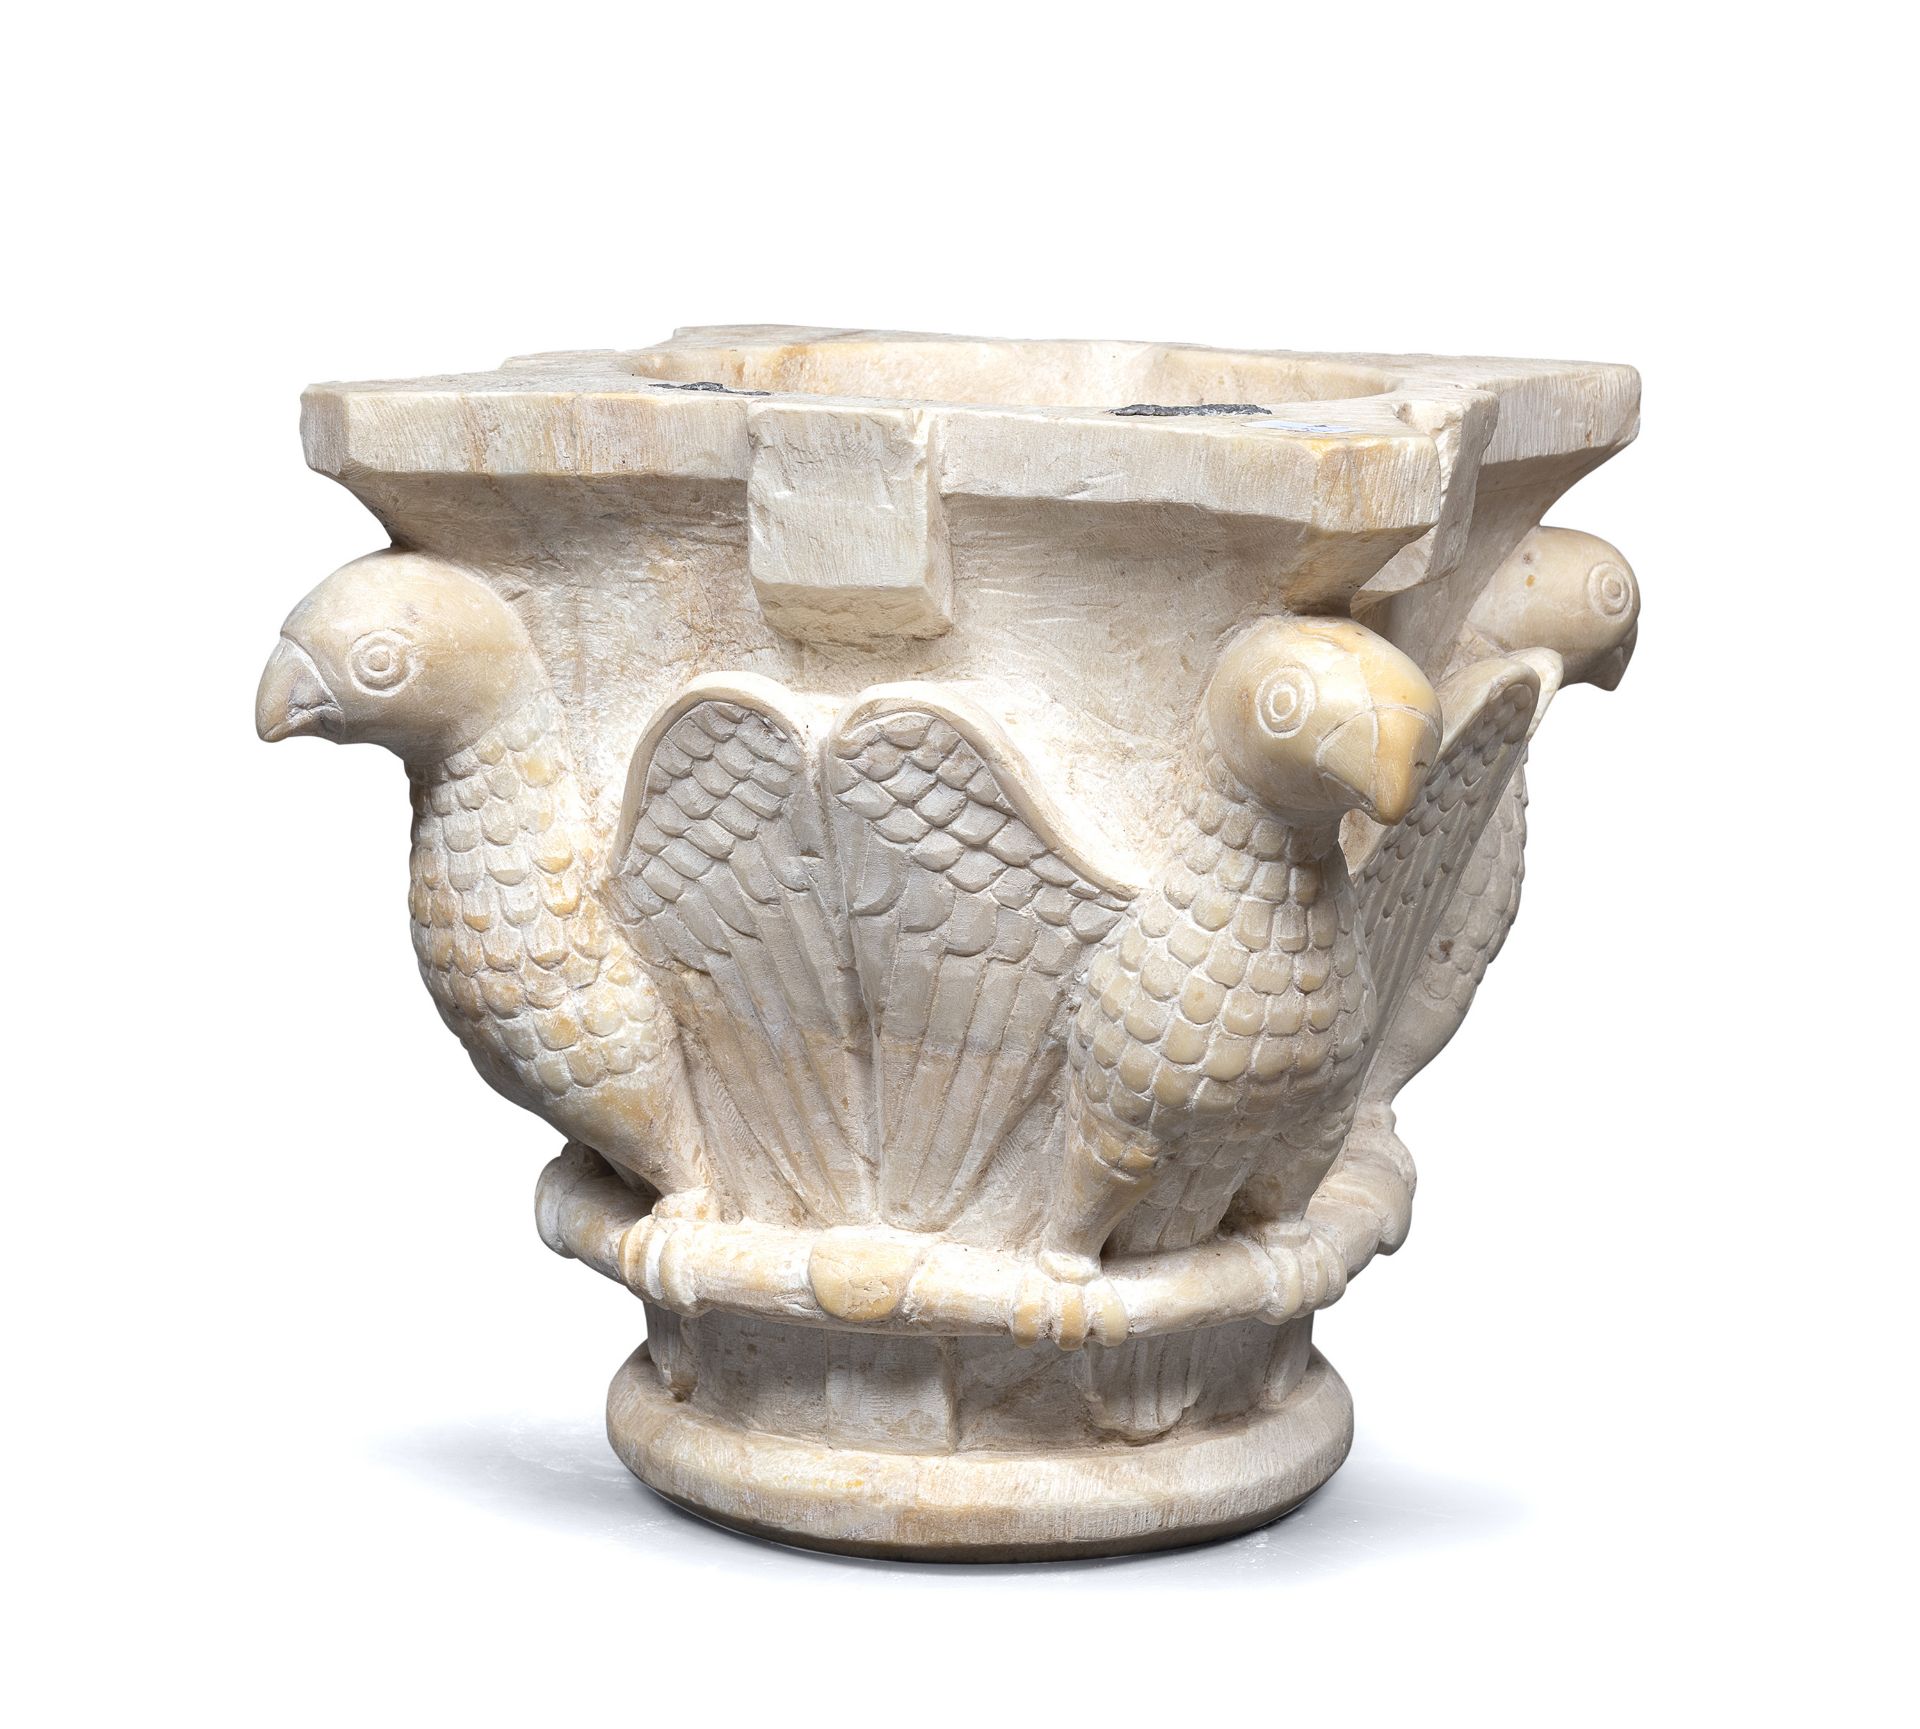 WHITE MARBLE CAPITAL CENTRAL ITALY ROMANESQUE PERIOD